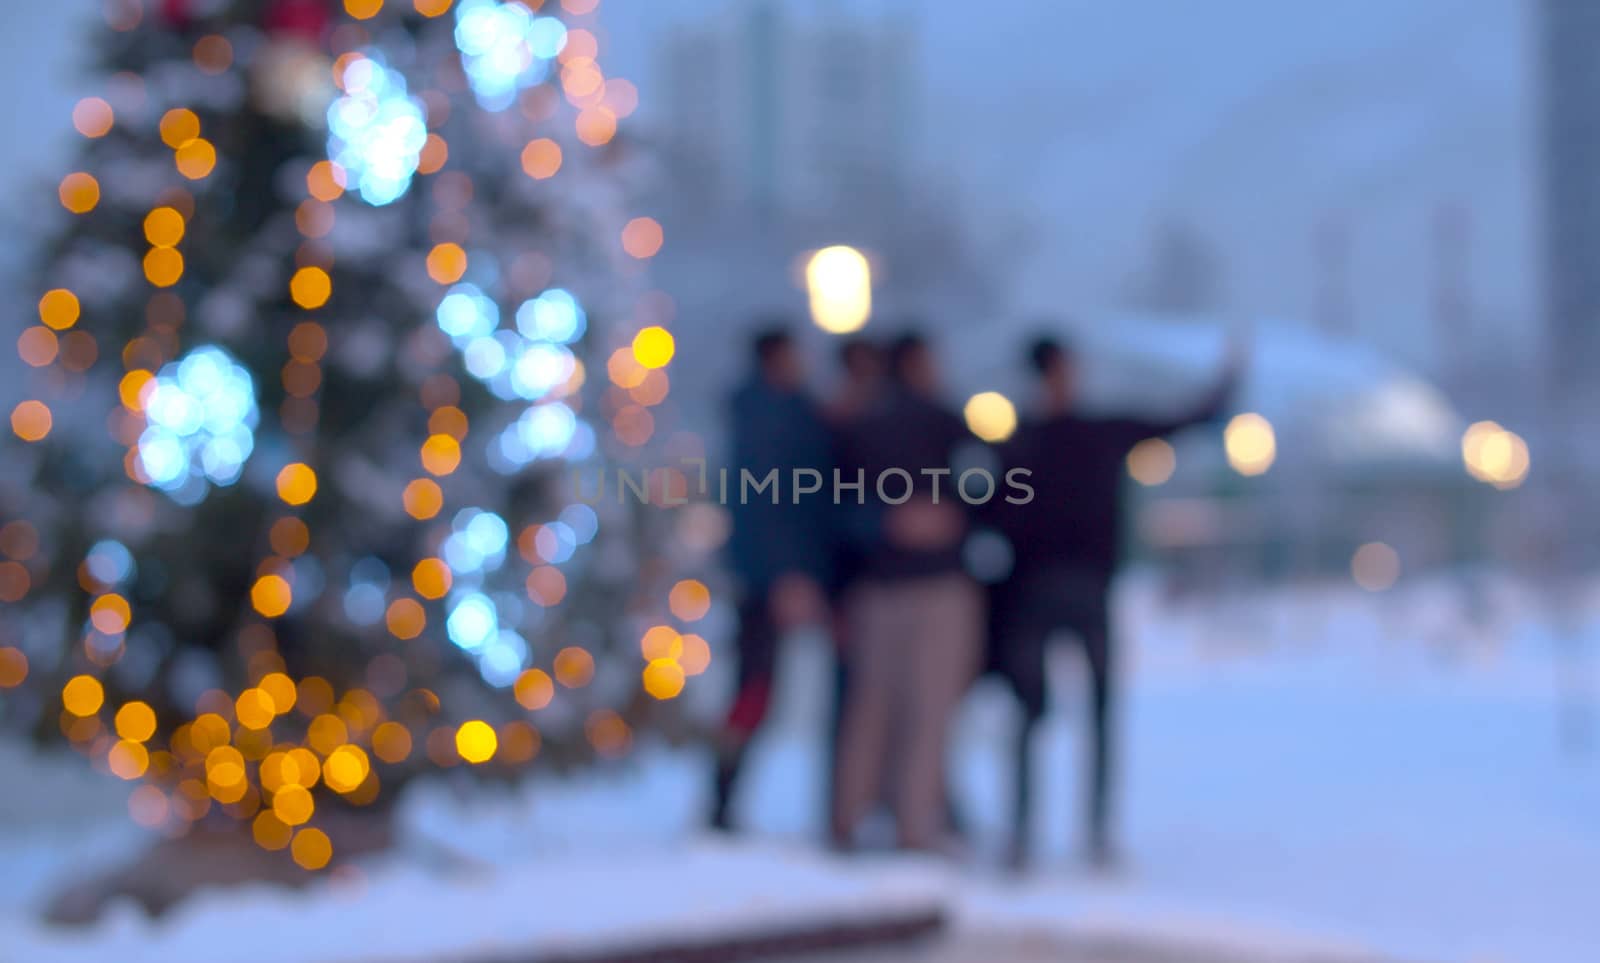 Blurry unrecognizable people take selfie near the Christmas tree outdoors. City holiday decorations.